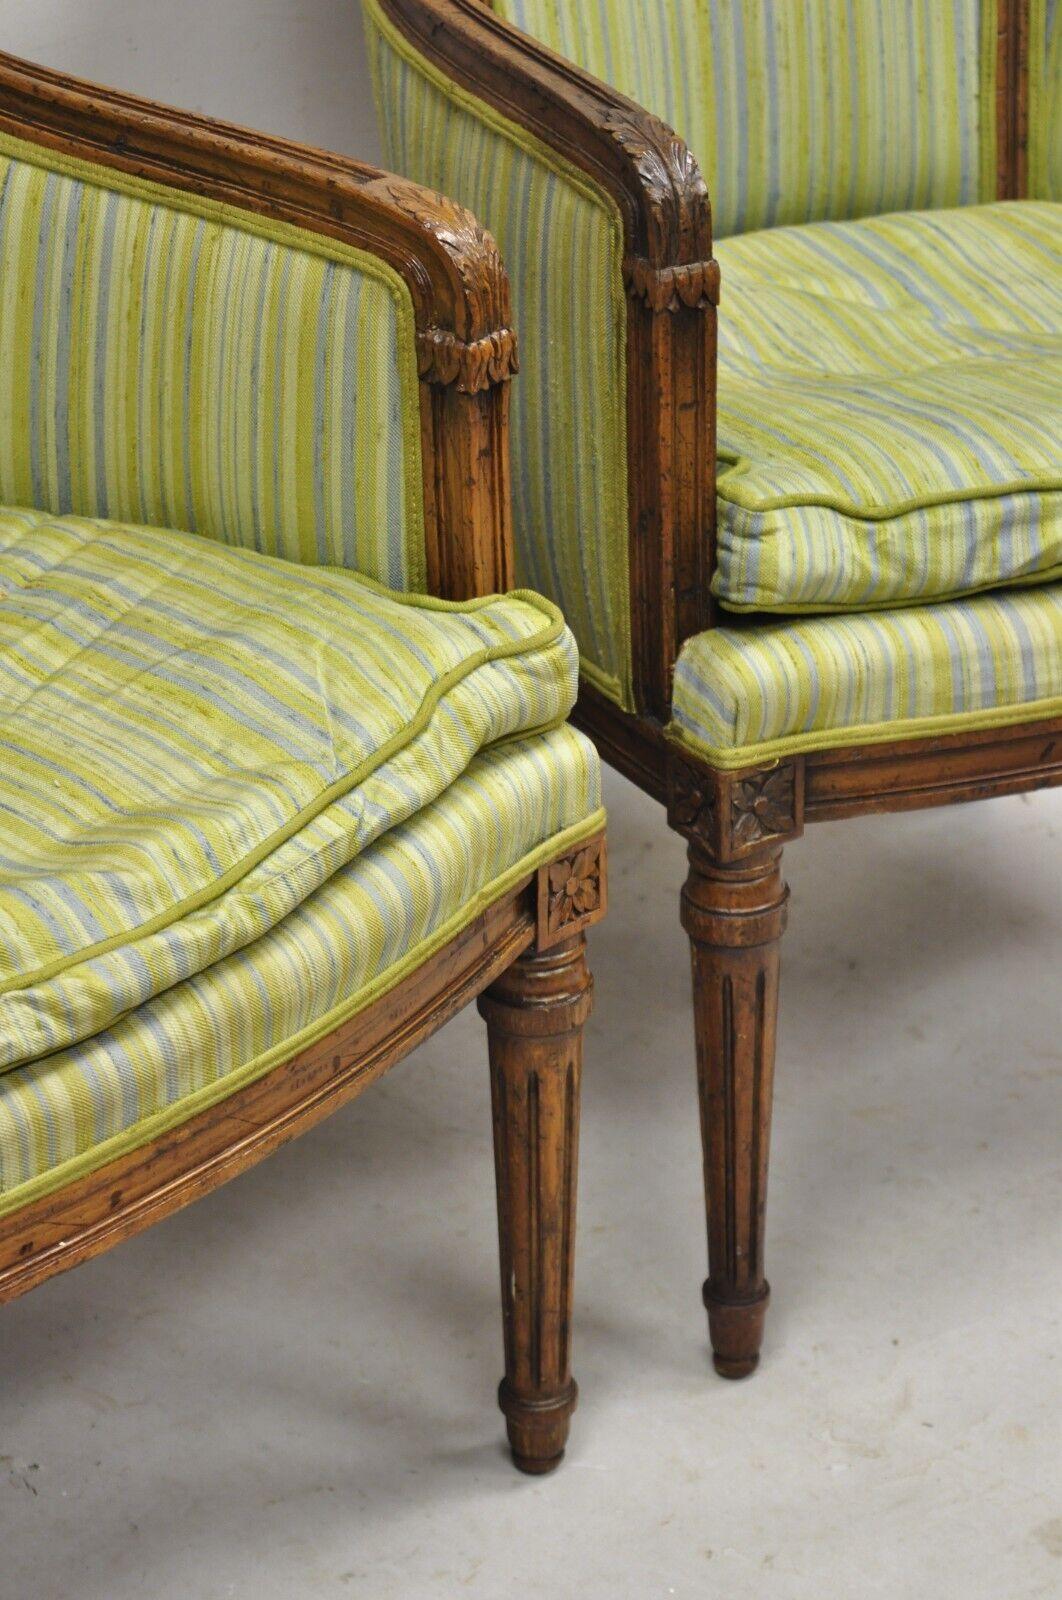 Antique Italian Regency Distressed Carved Walnut Barrel Back Club Chairs - Pair For Sale 8